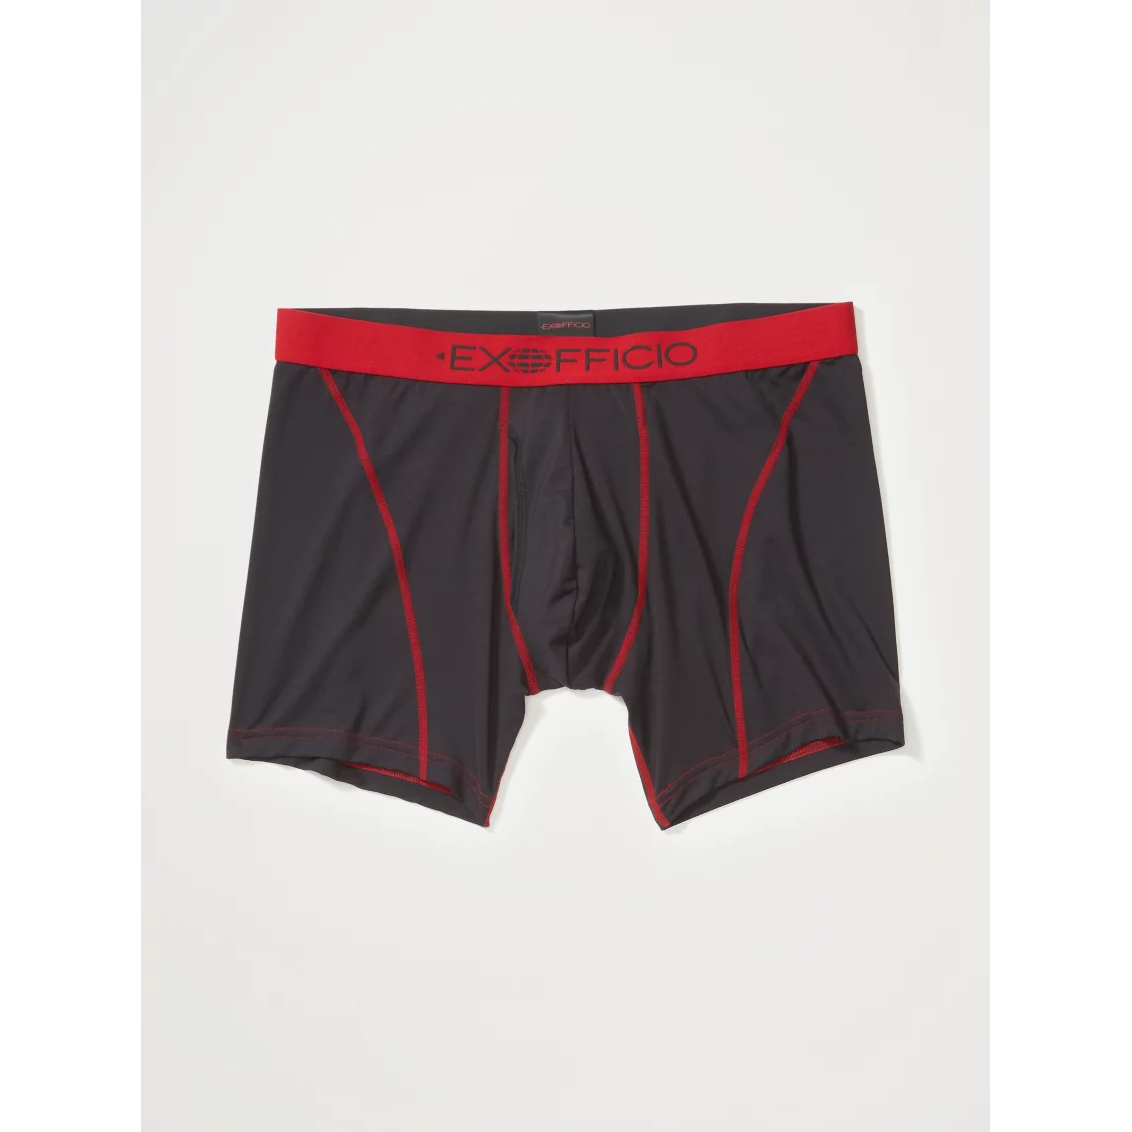 The Best Underwear for Backpacking— By Land